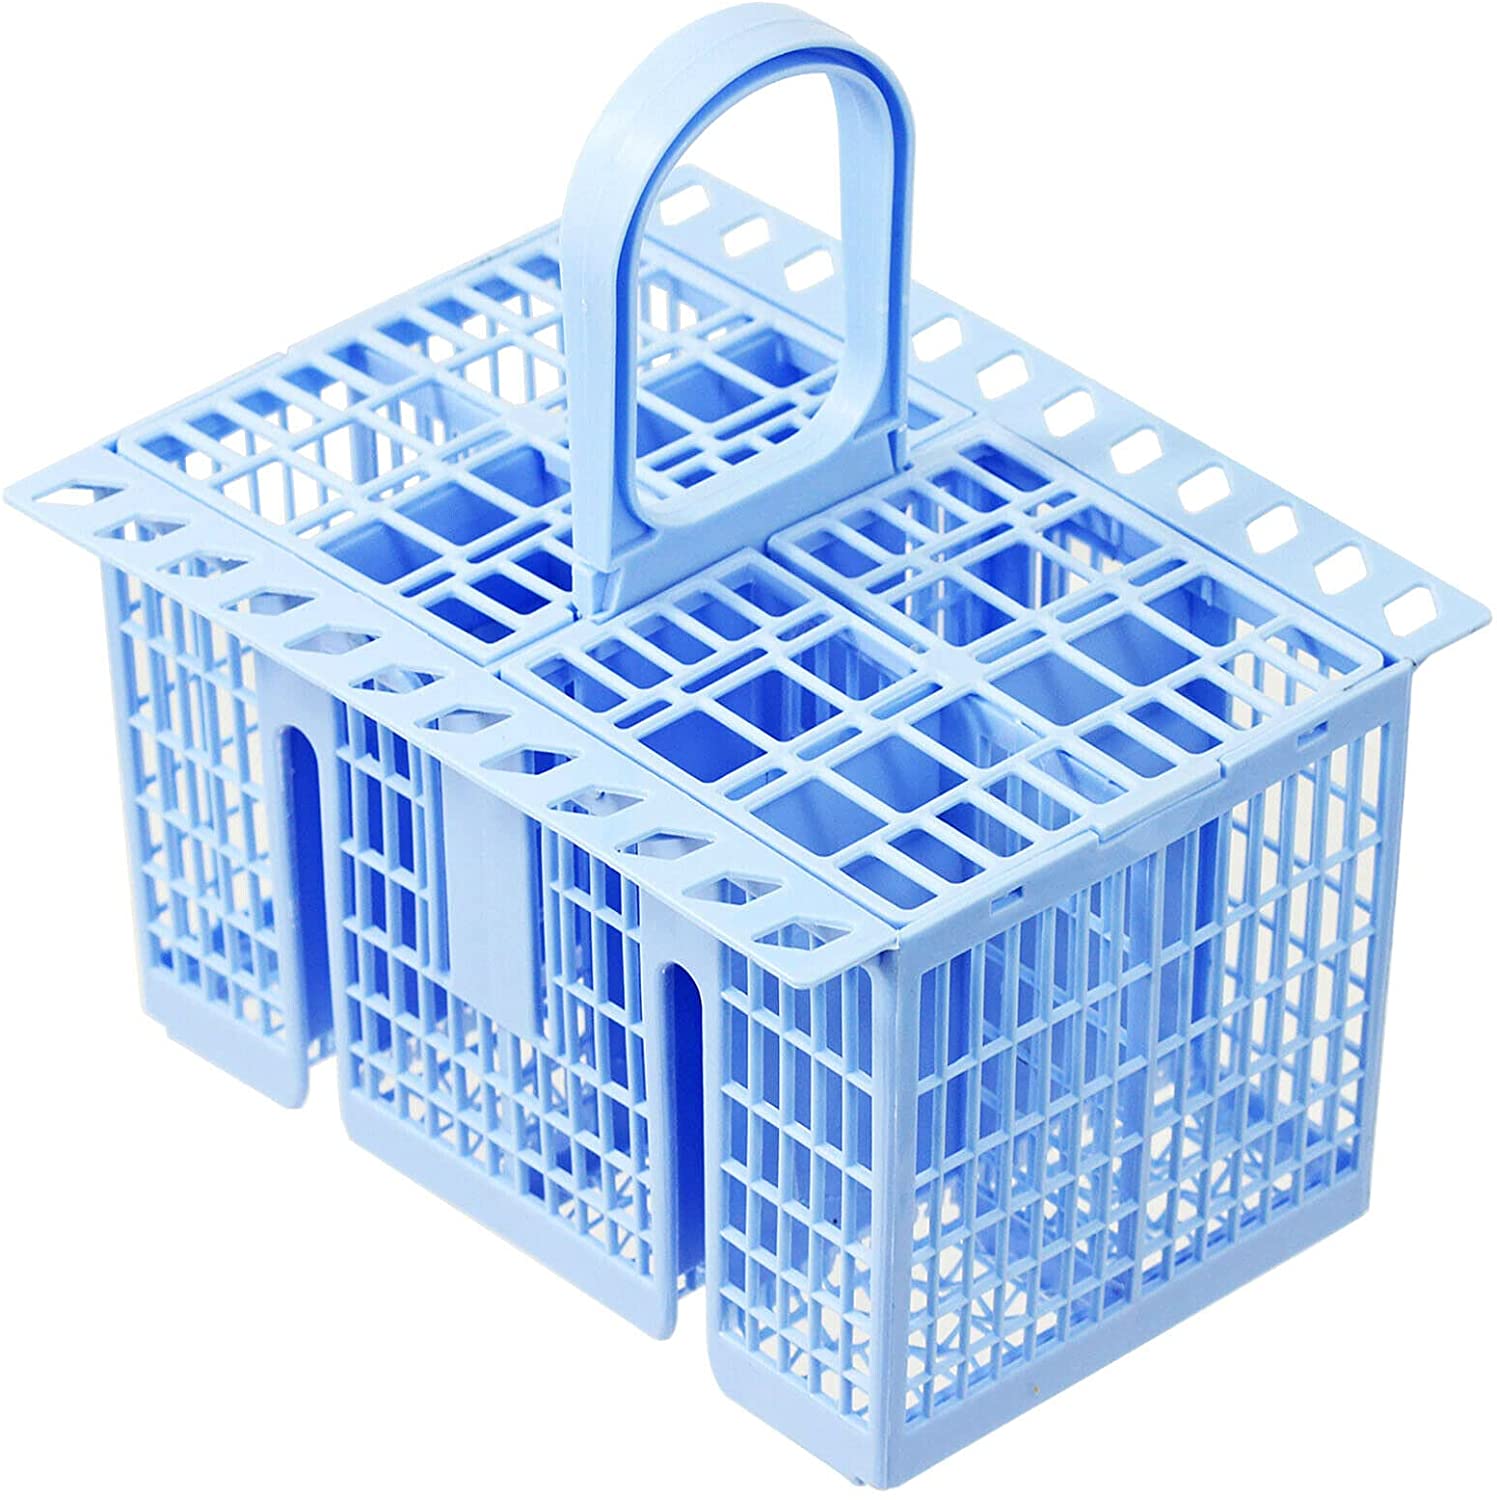 SPARES2GO Cutlery Basket compatible with Montpellier Dishwasher (Blue, 220 x 208 x 160mm)